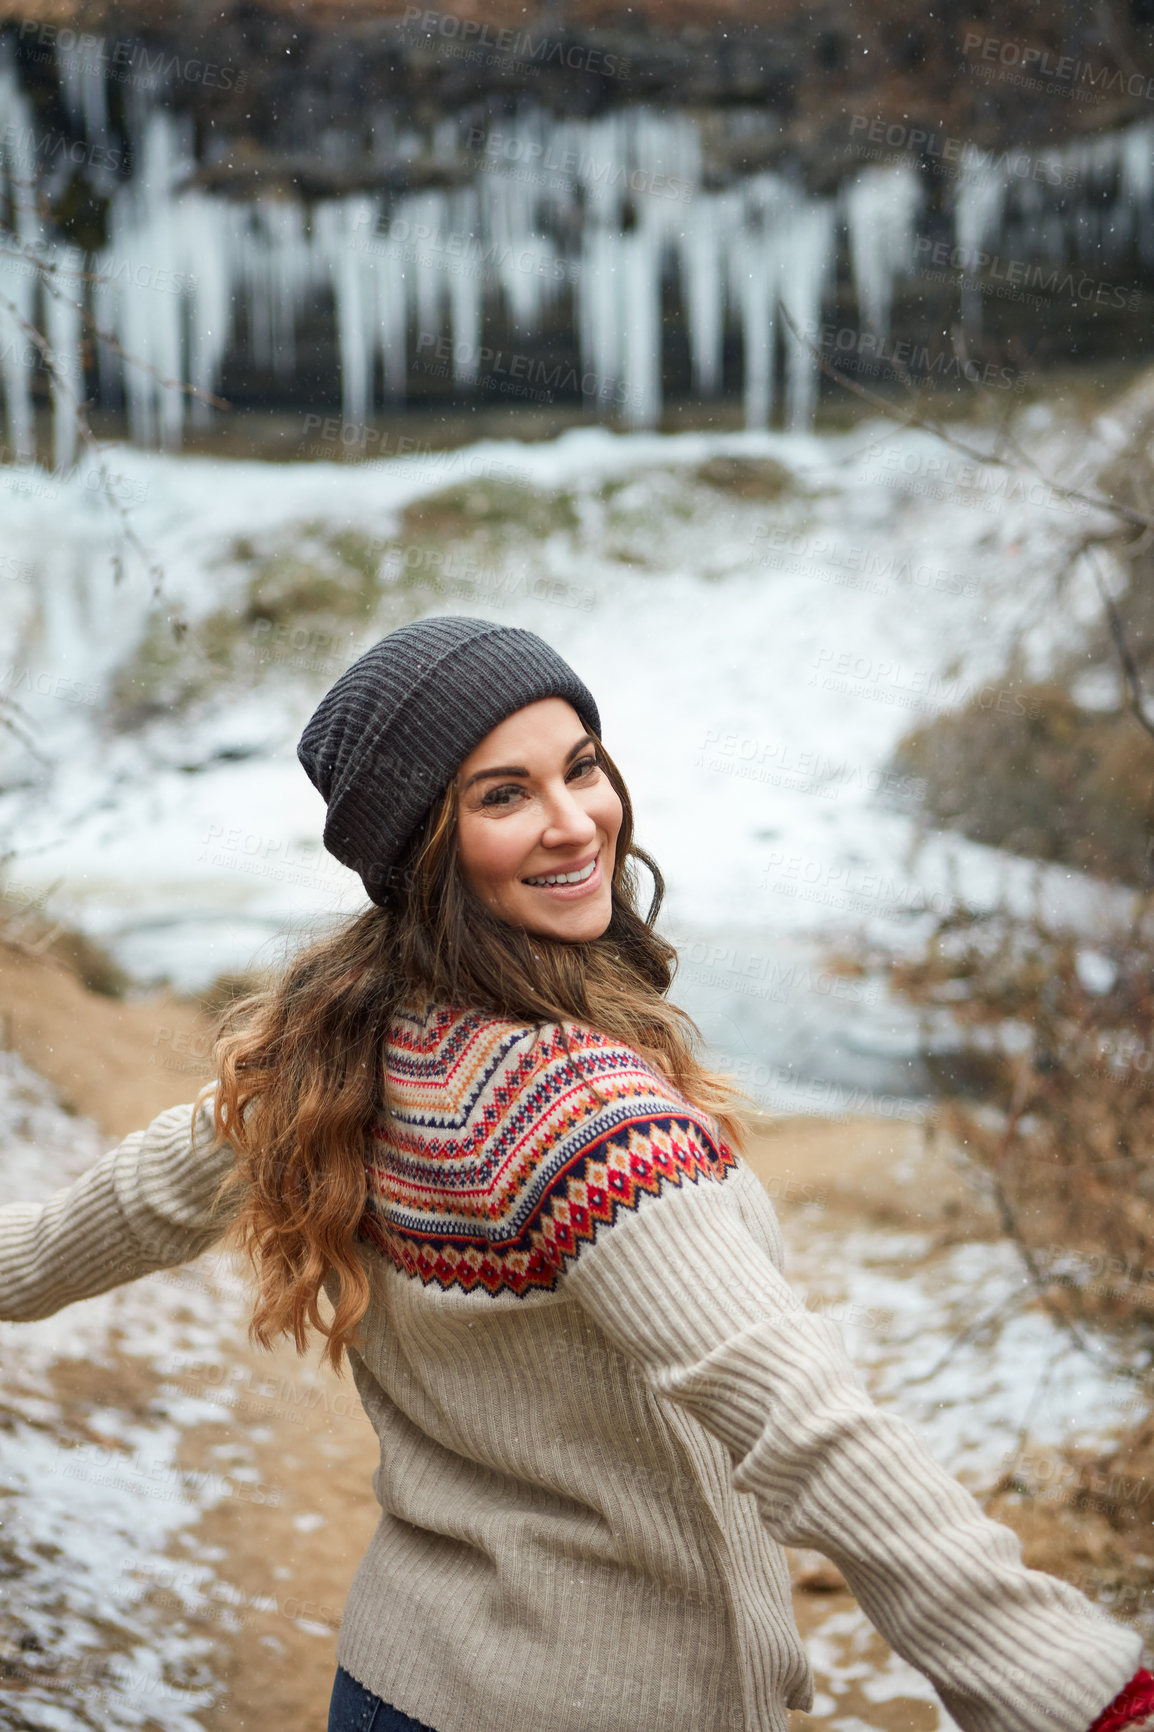 Buy stock photo Rearview portrait of an attractive young woman spending the day outside during winter